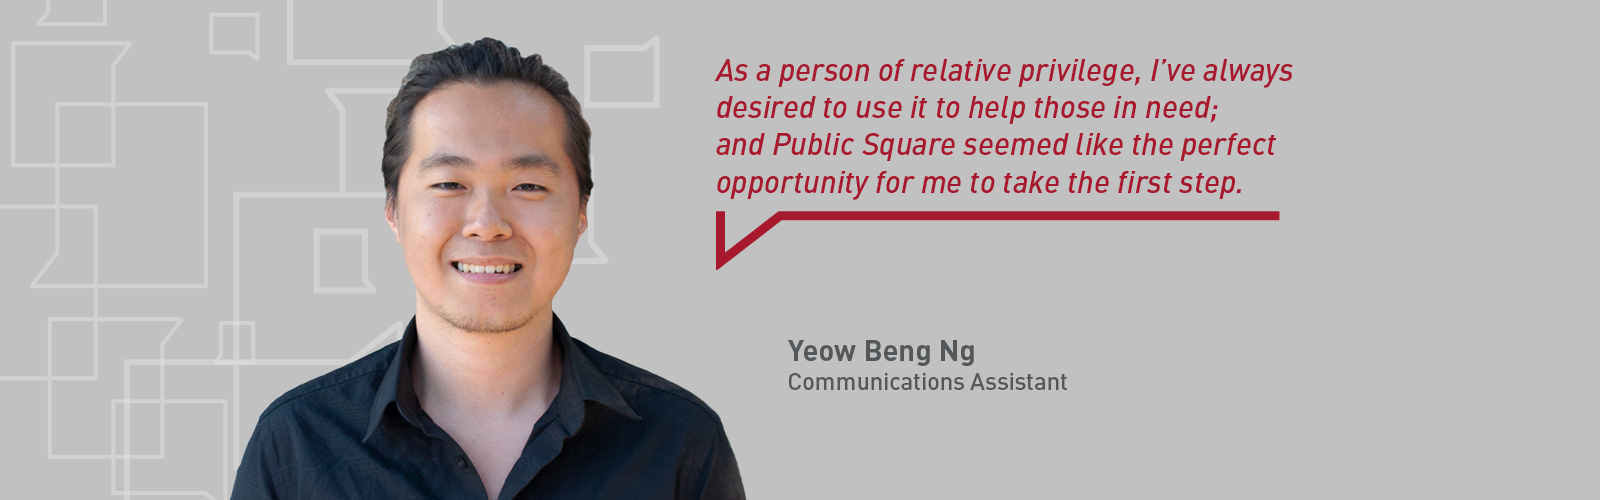 Headshot of communications assistant Yeow Beng Ng with a quote that reads "As a person of relative privilege, I’ve always desired to use it to help those in need; and Public Square seemed like the perfect opportunity for me to take the first step."